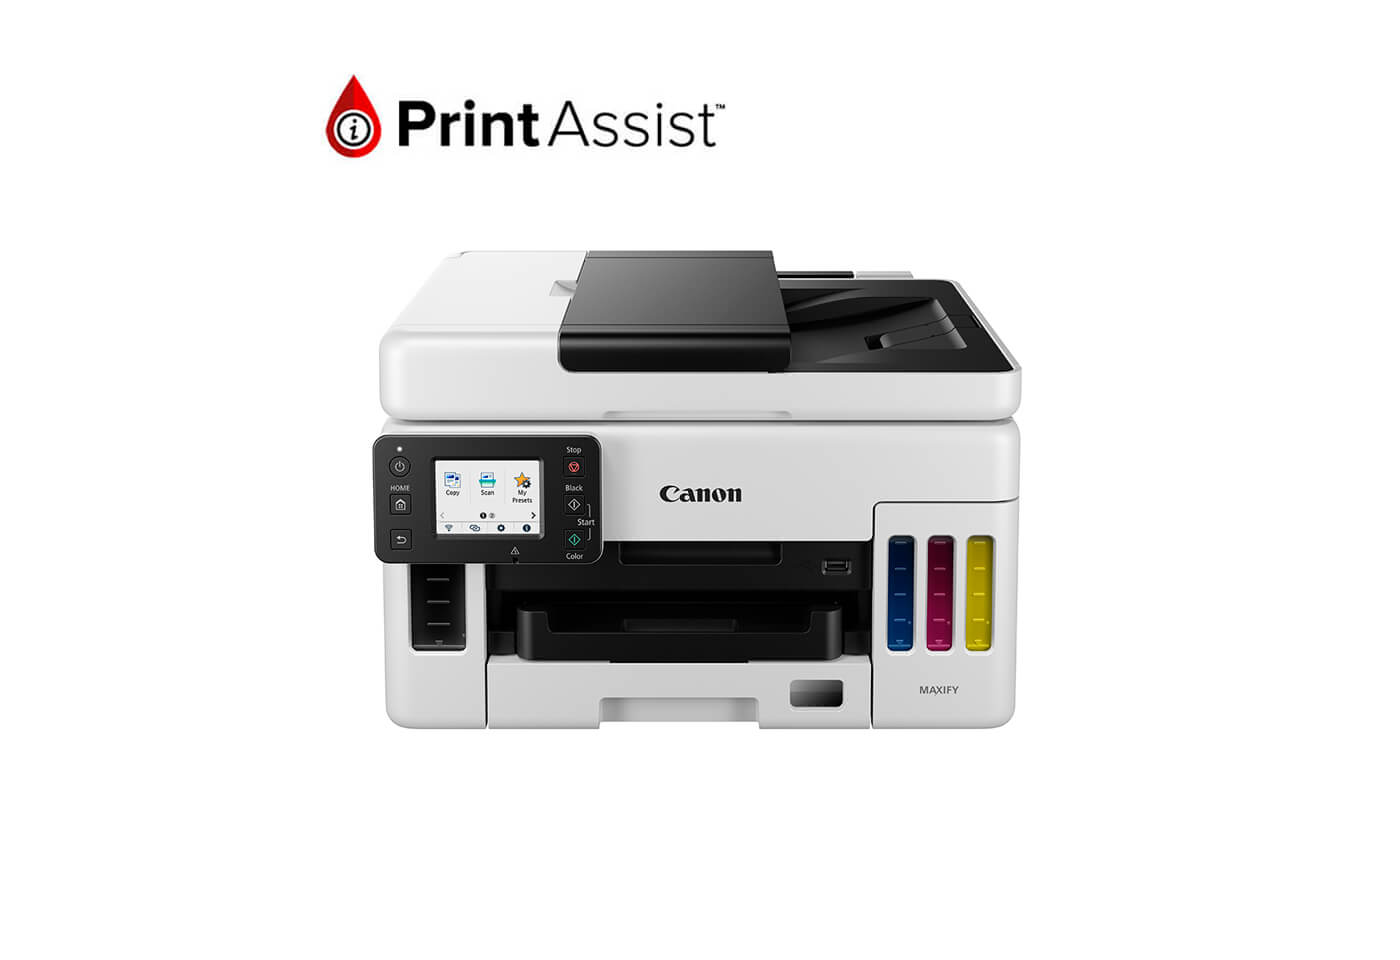 Product image of MAXIFY GX6060 MegaTank office printer with print assist